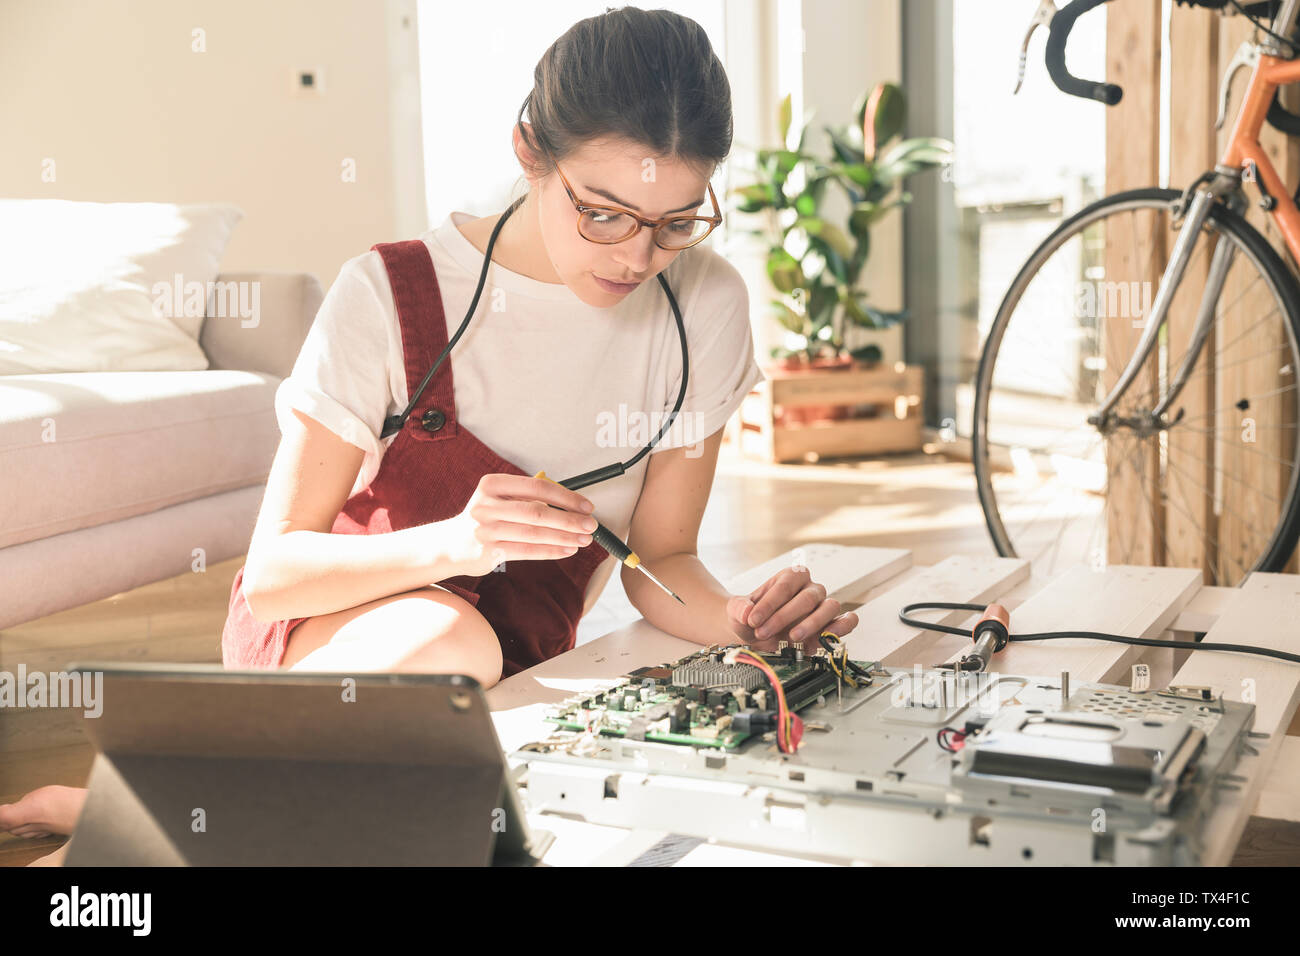 Young woman working on computer equipment at home next to tablet Stock Photo